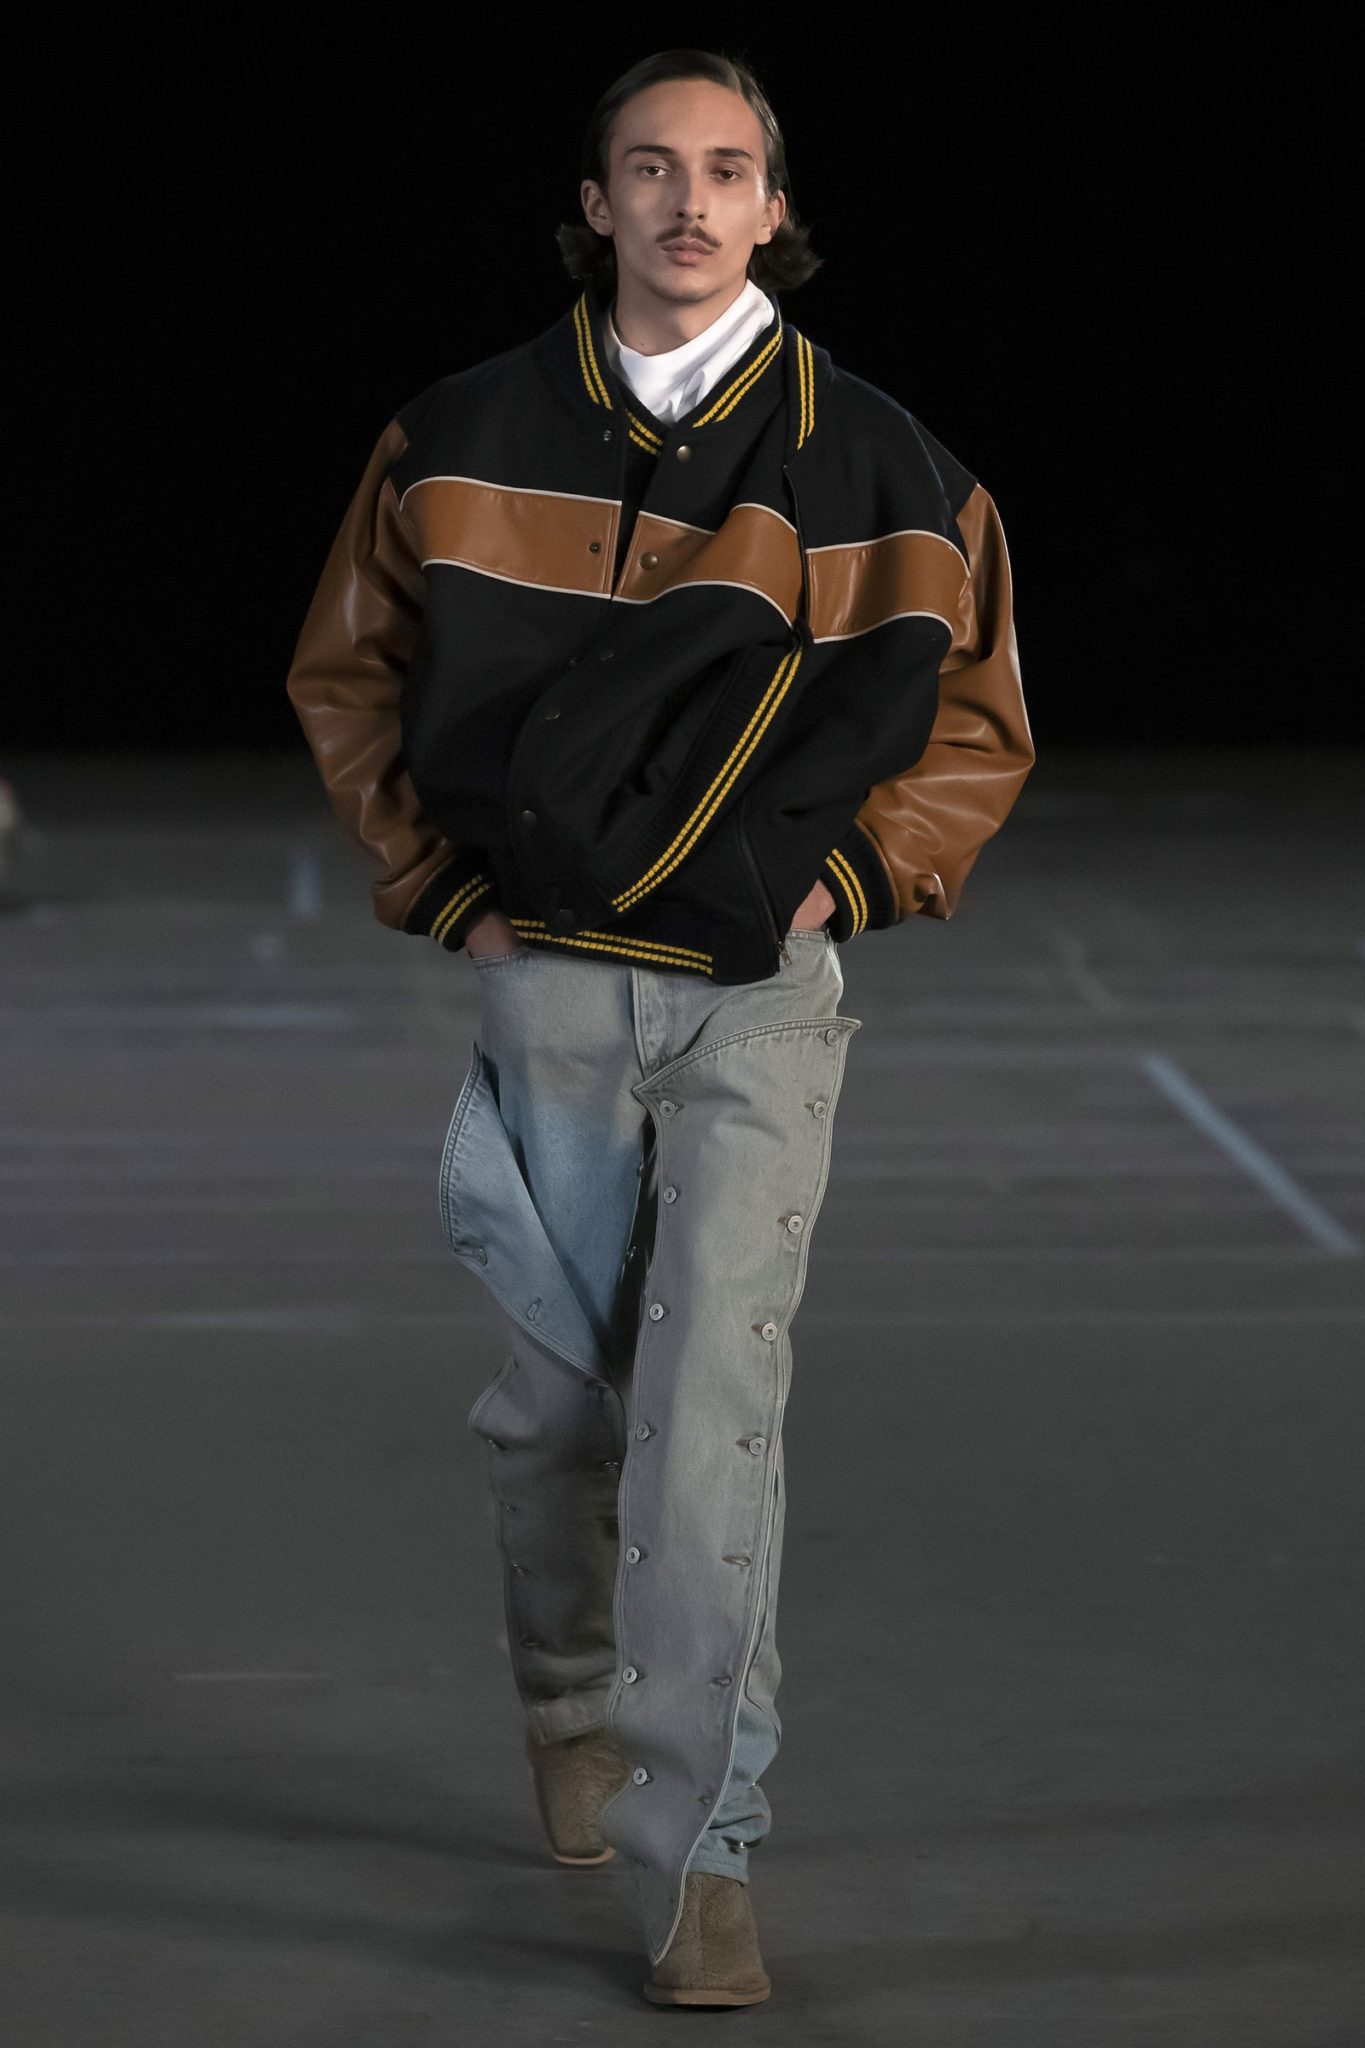 Varsity-Jacket Trend Inspiration and Shopping For 2022